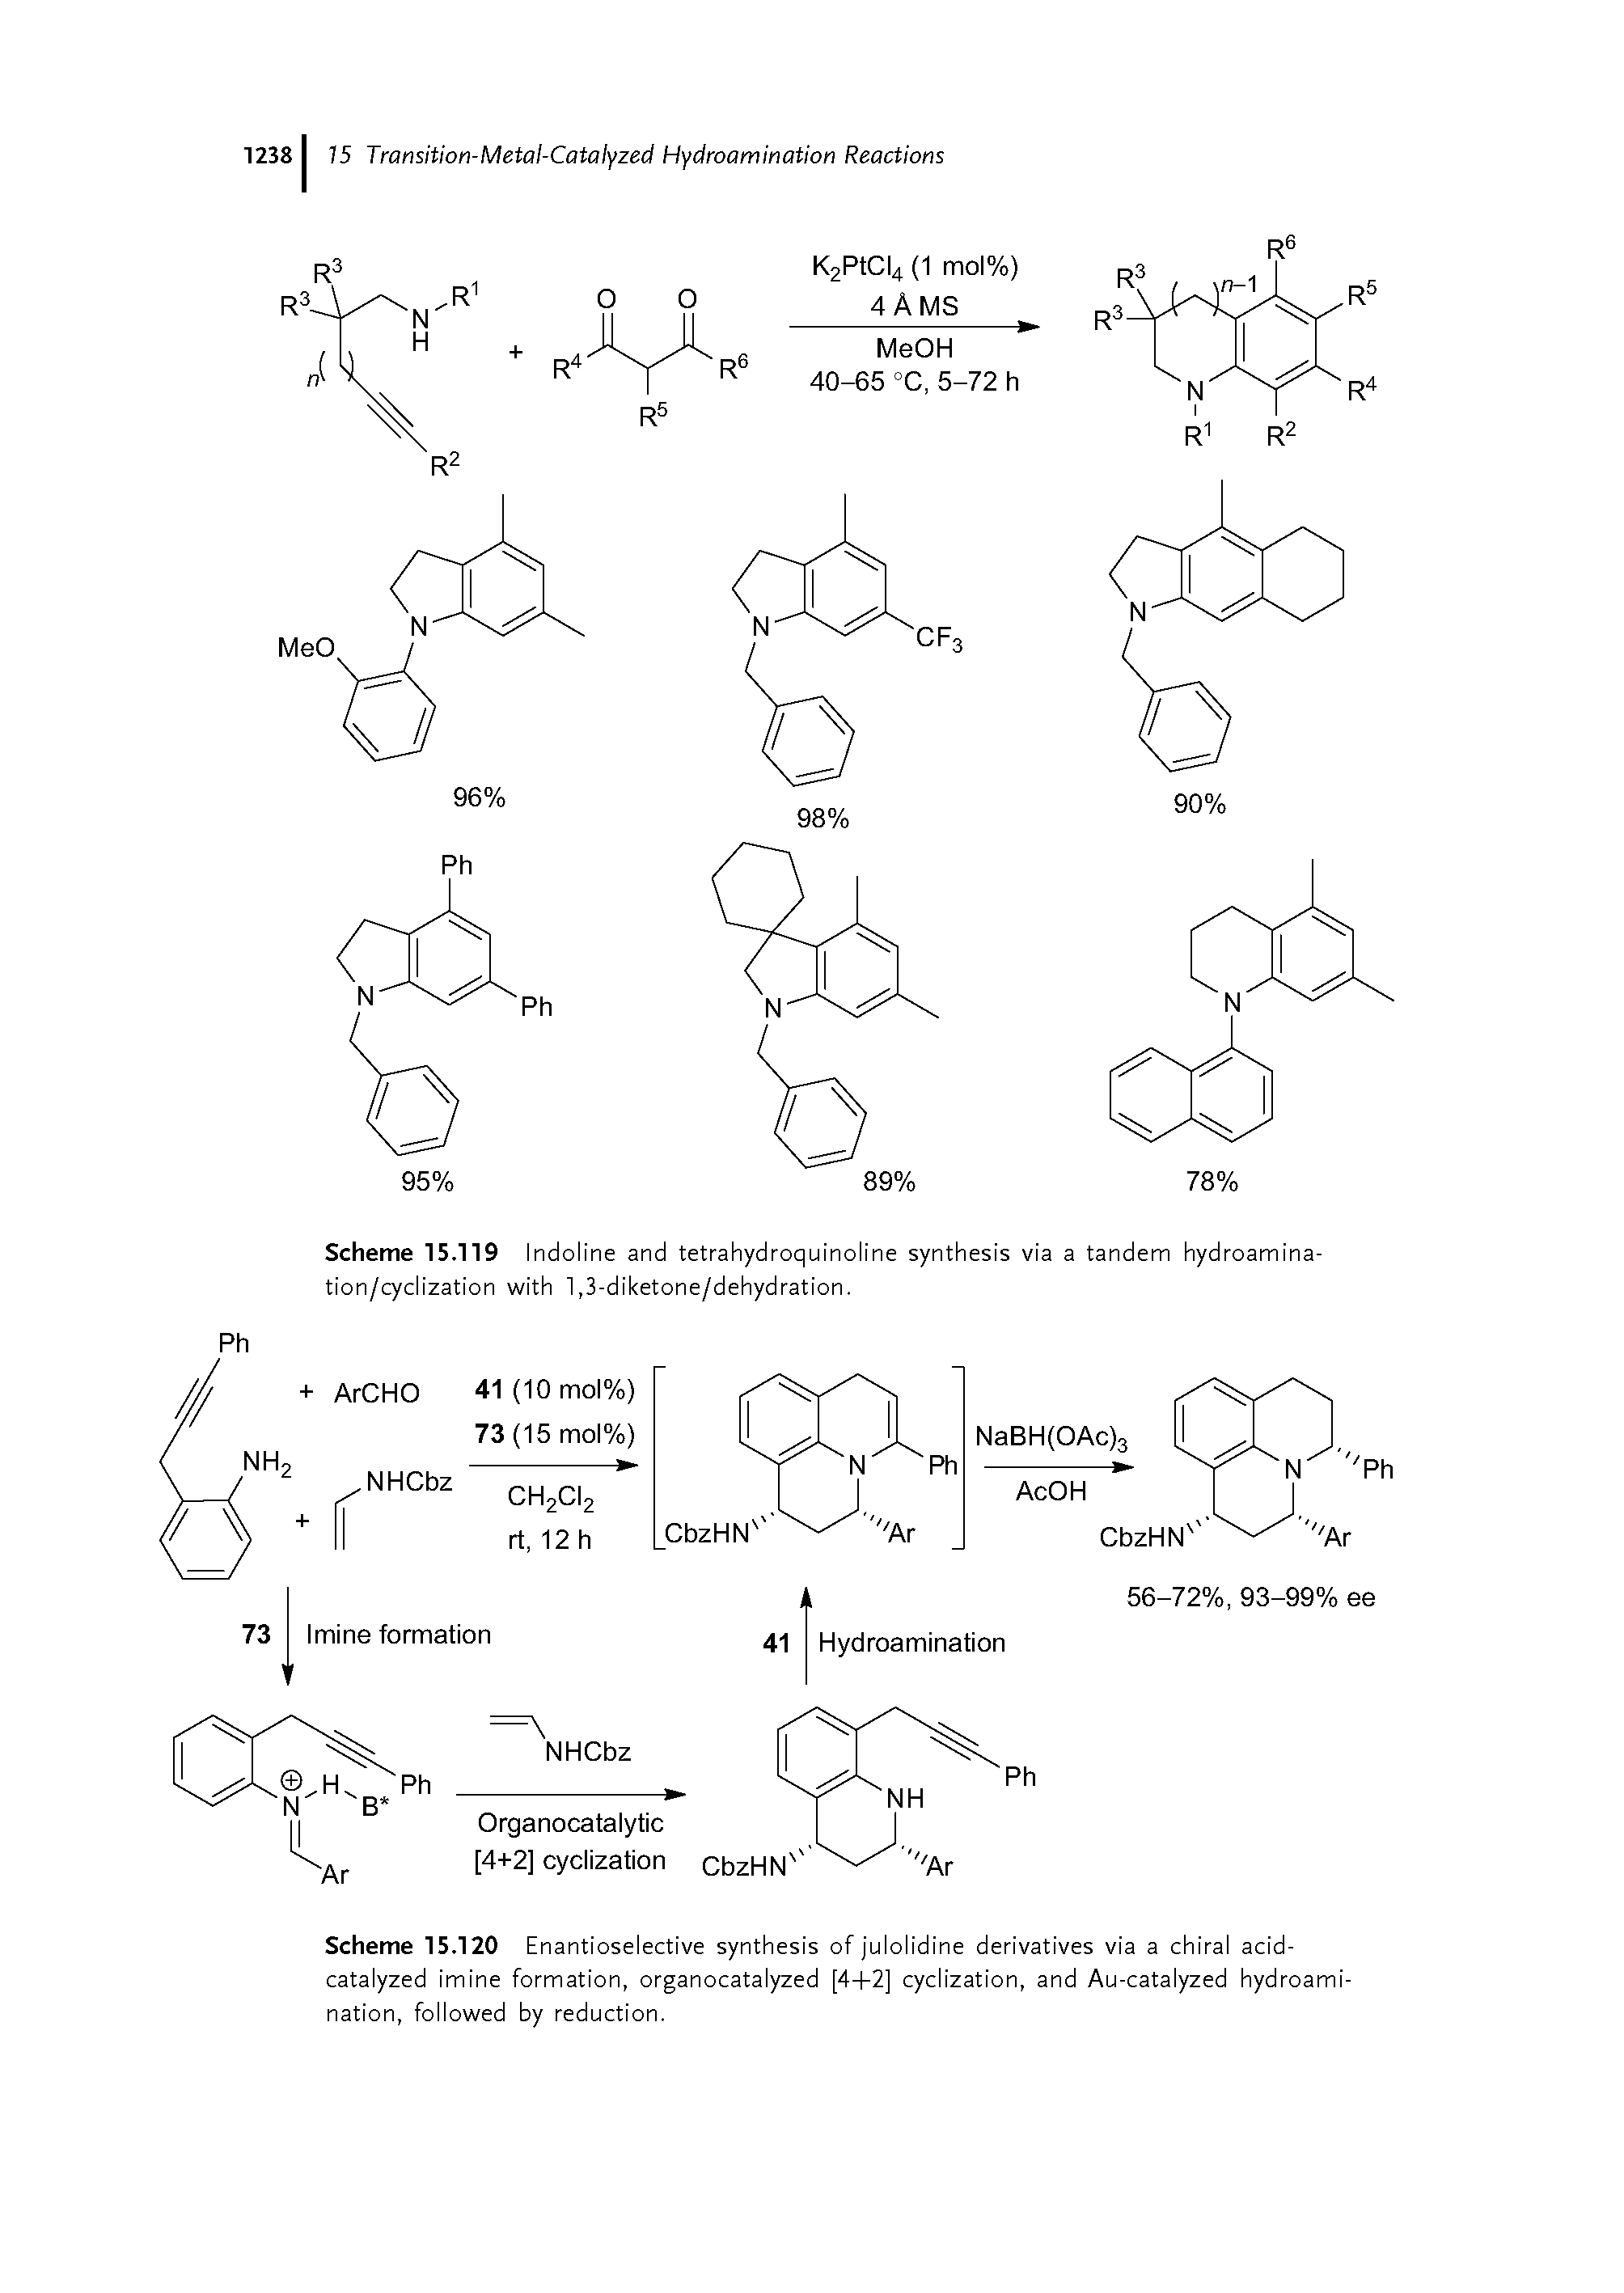 Scheme 15.120 En antioselective synthesis of julolidine derivatives via a chiral acid-catalyzed imine formation, organocatalyzed [4+2] cyclization, and Au-catalyzed hydroamination, followed by reduction.